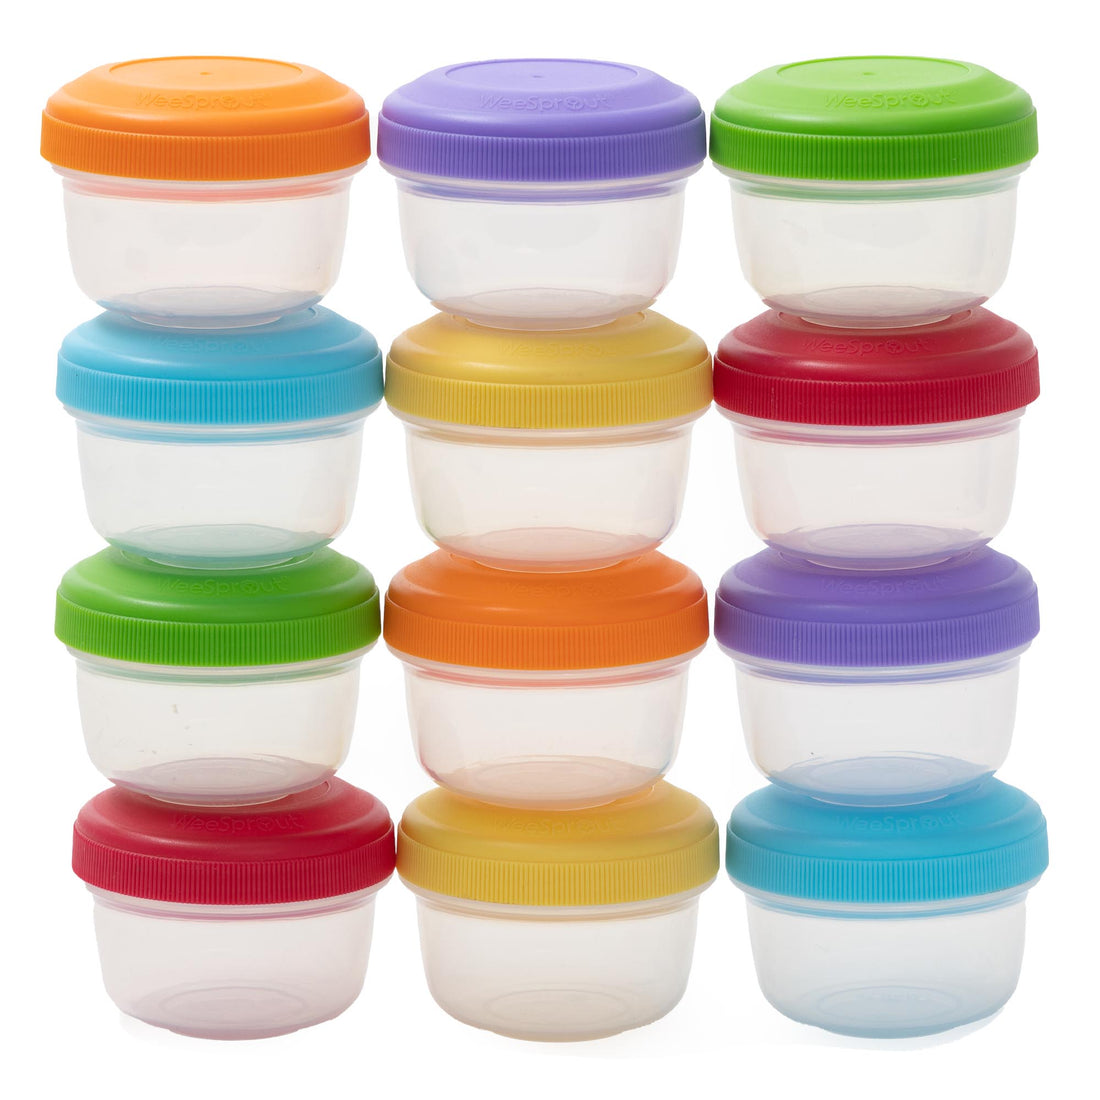 Durable Plastic Food Container Set with Snap Locking Lids, 48